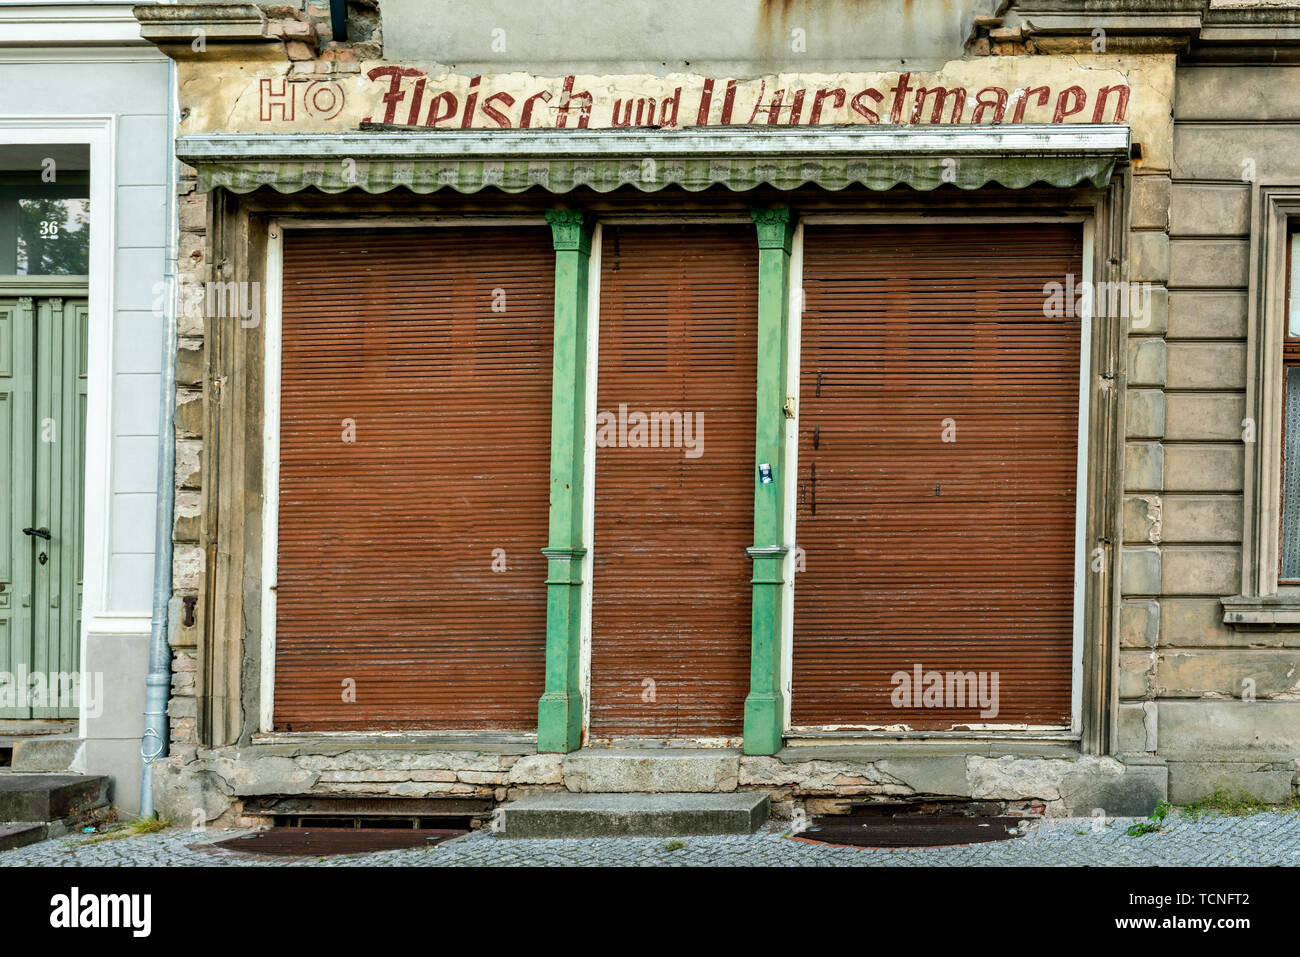 historical gdr (east germany) butcher shop for meat and sausages closed for 30 years now Stock Photo